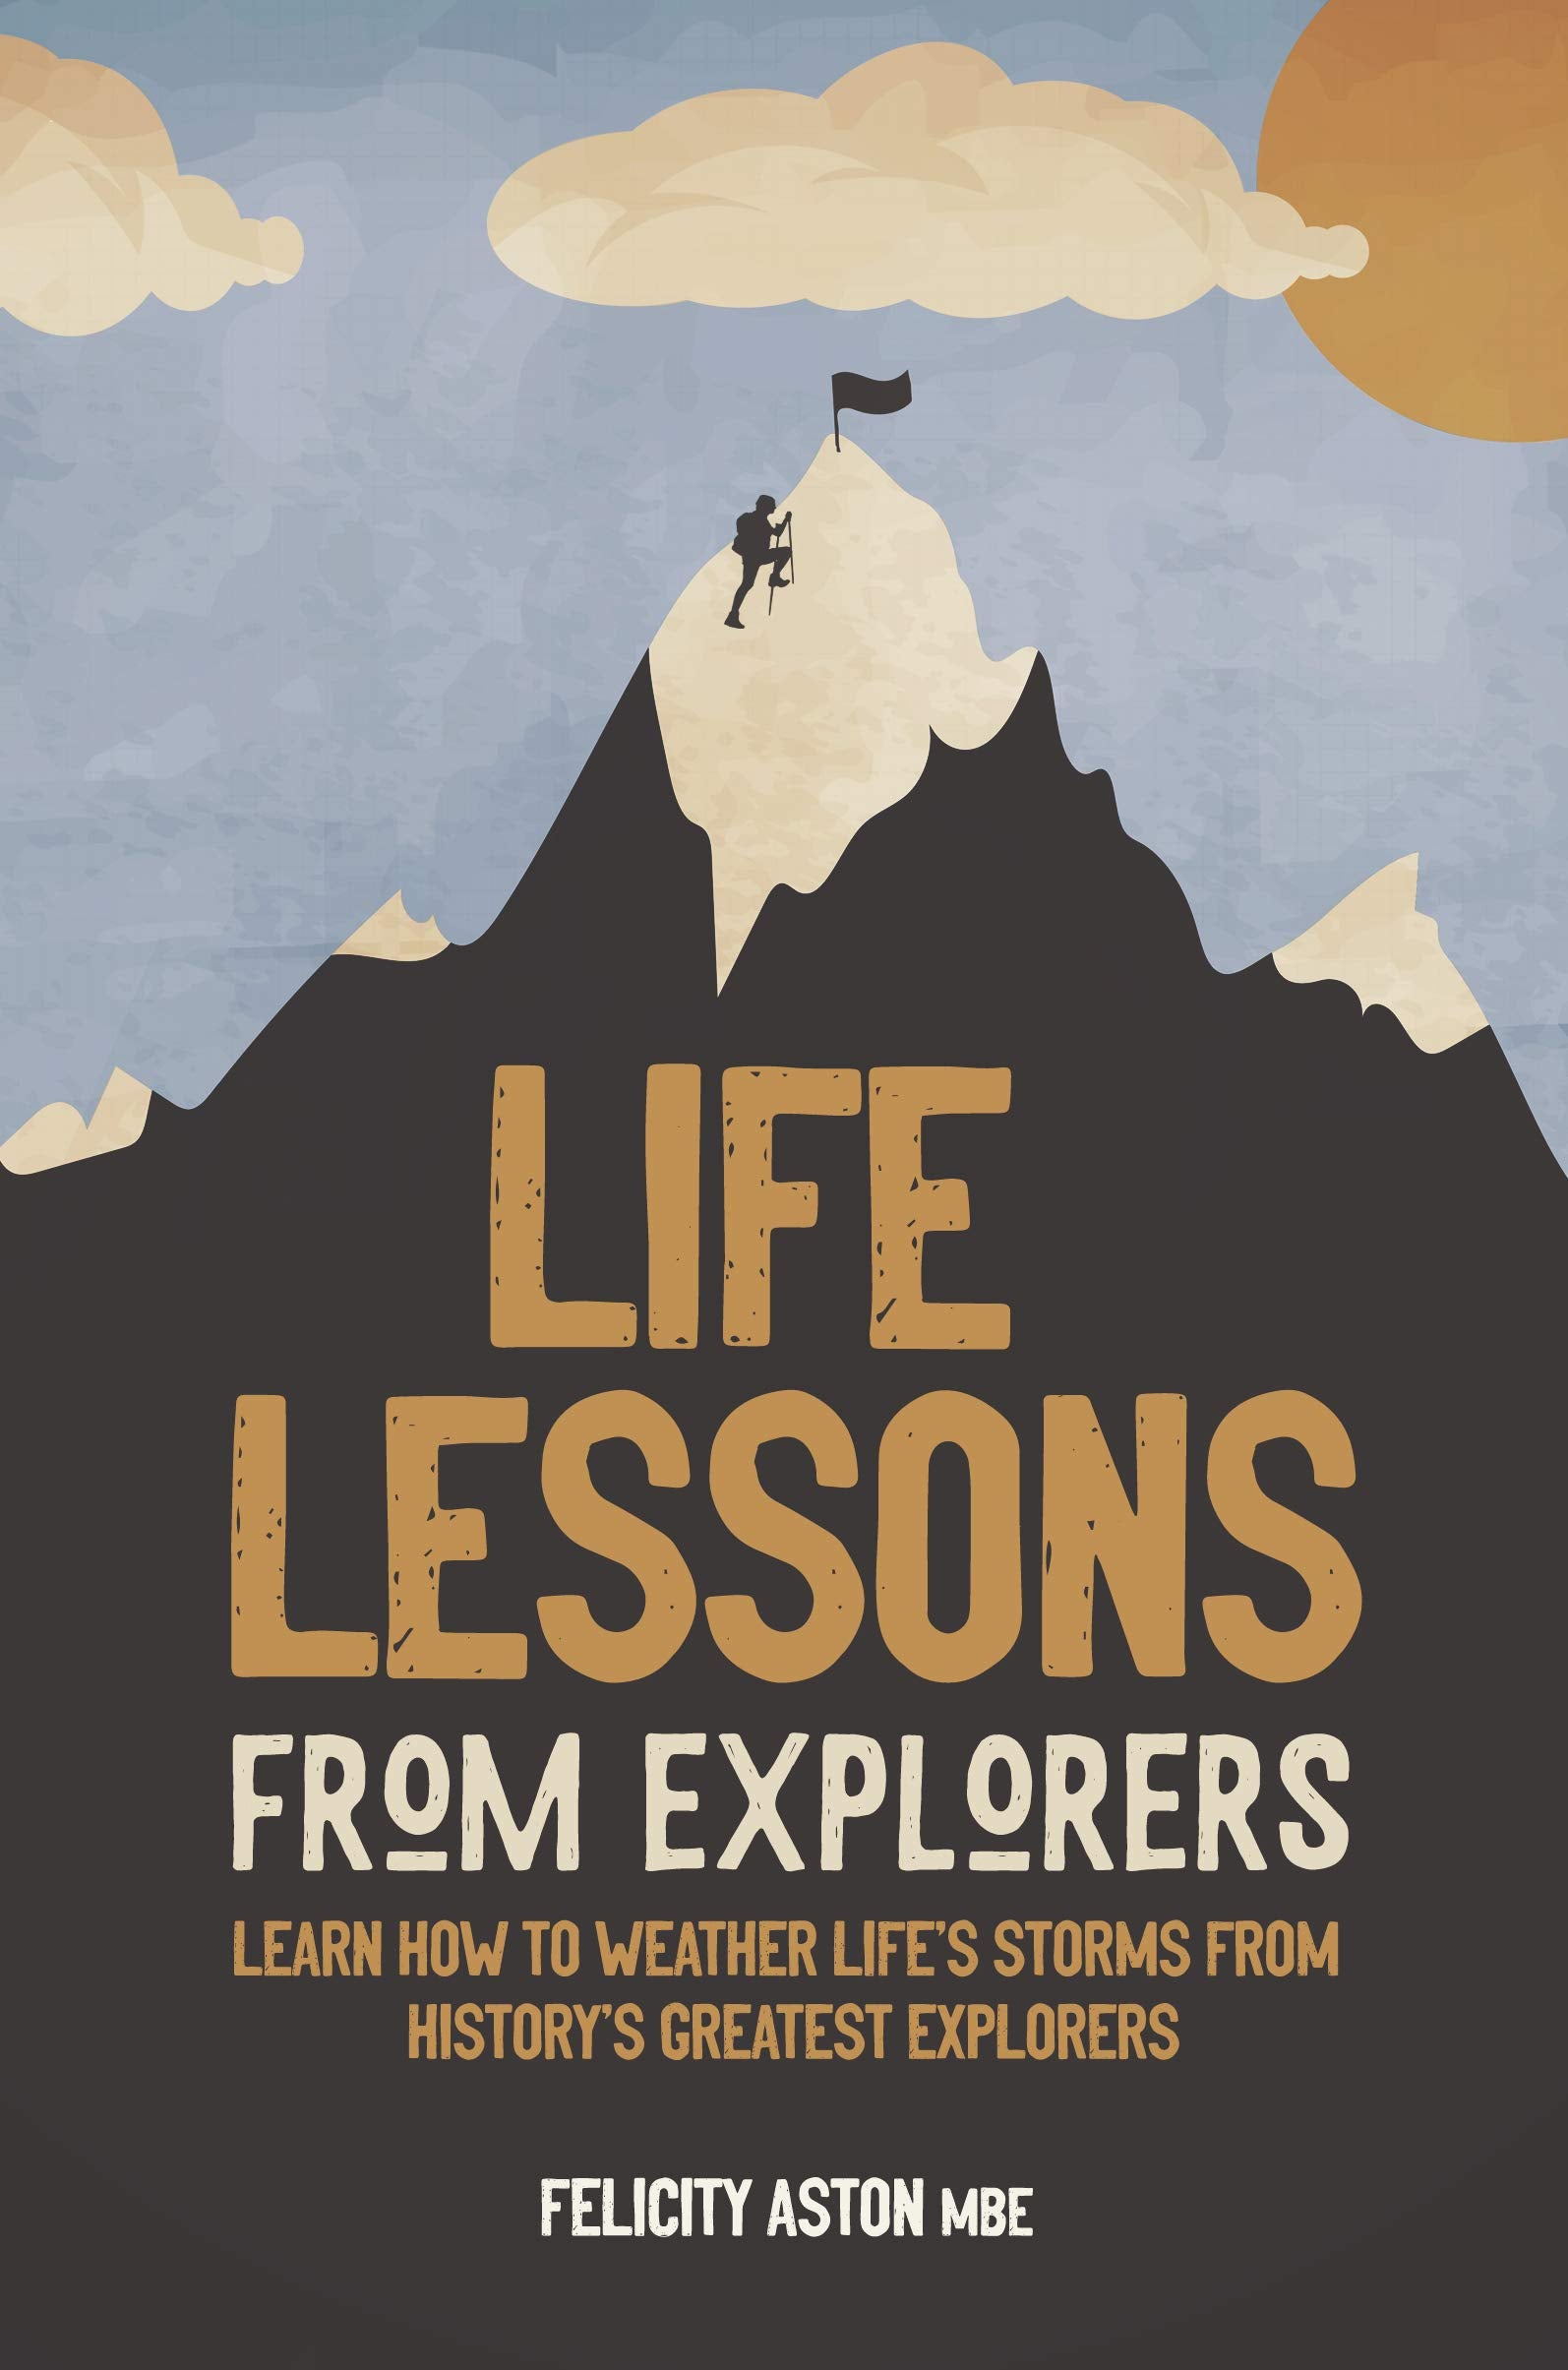 Life Lessons from Explorers